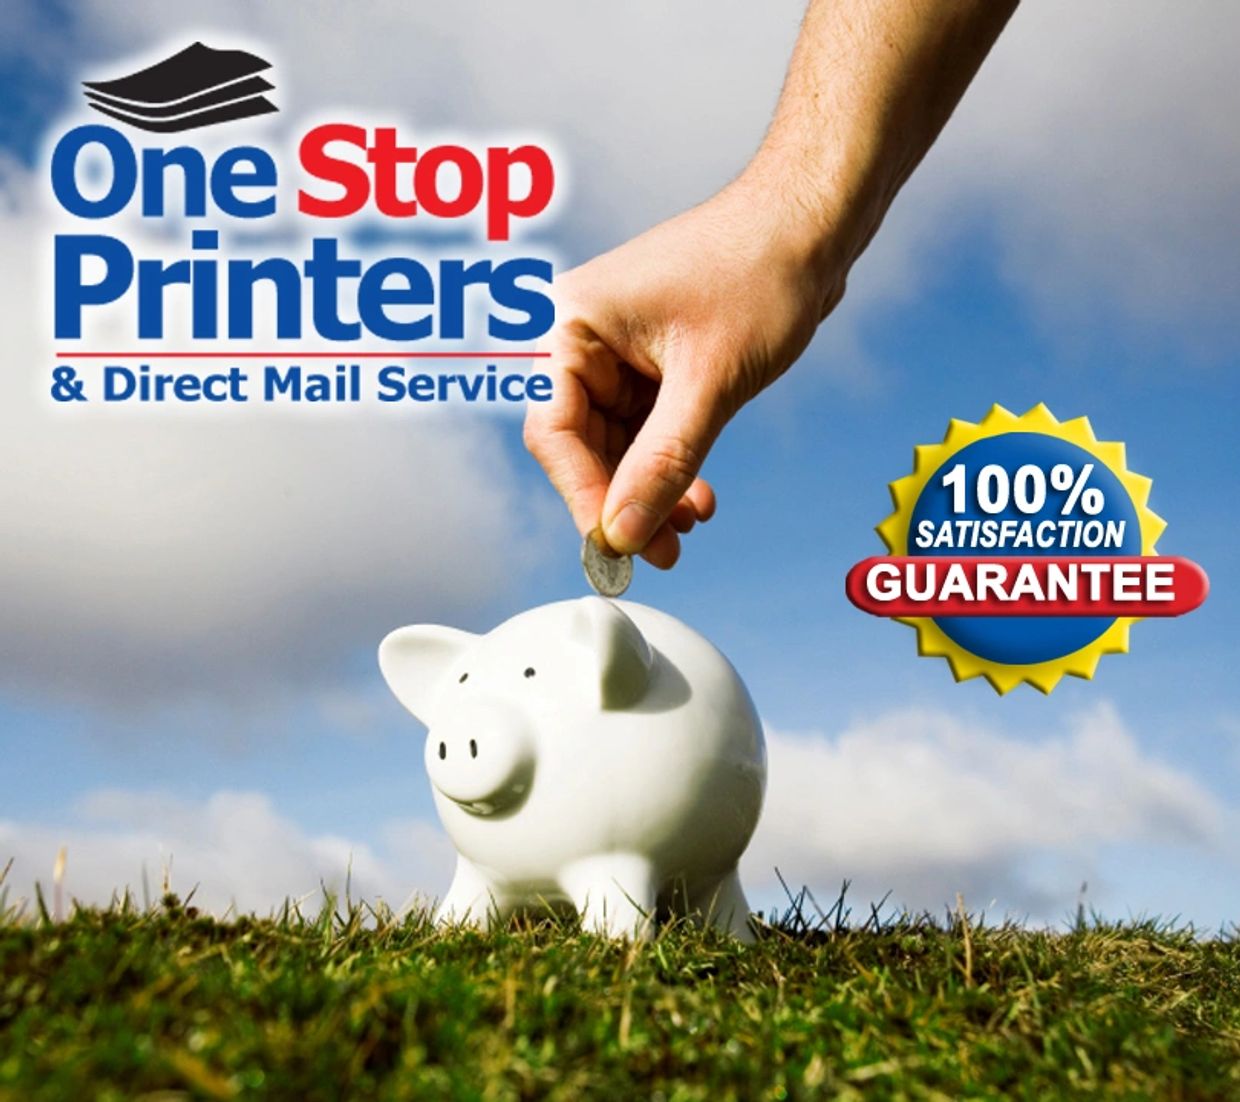 One Stop Printers saves time and money with our large selection of invoice, work order templates